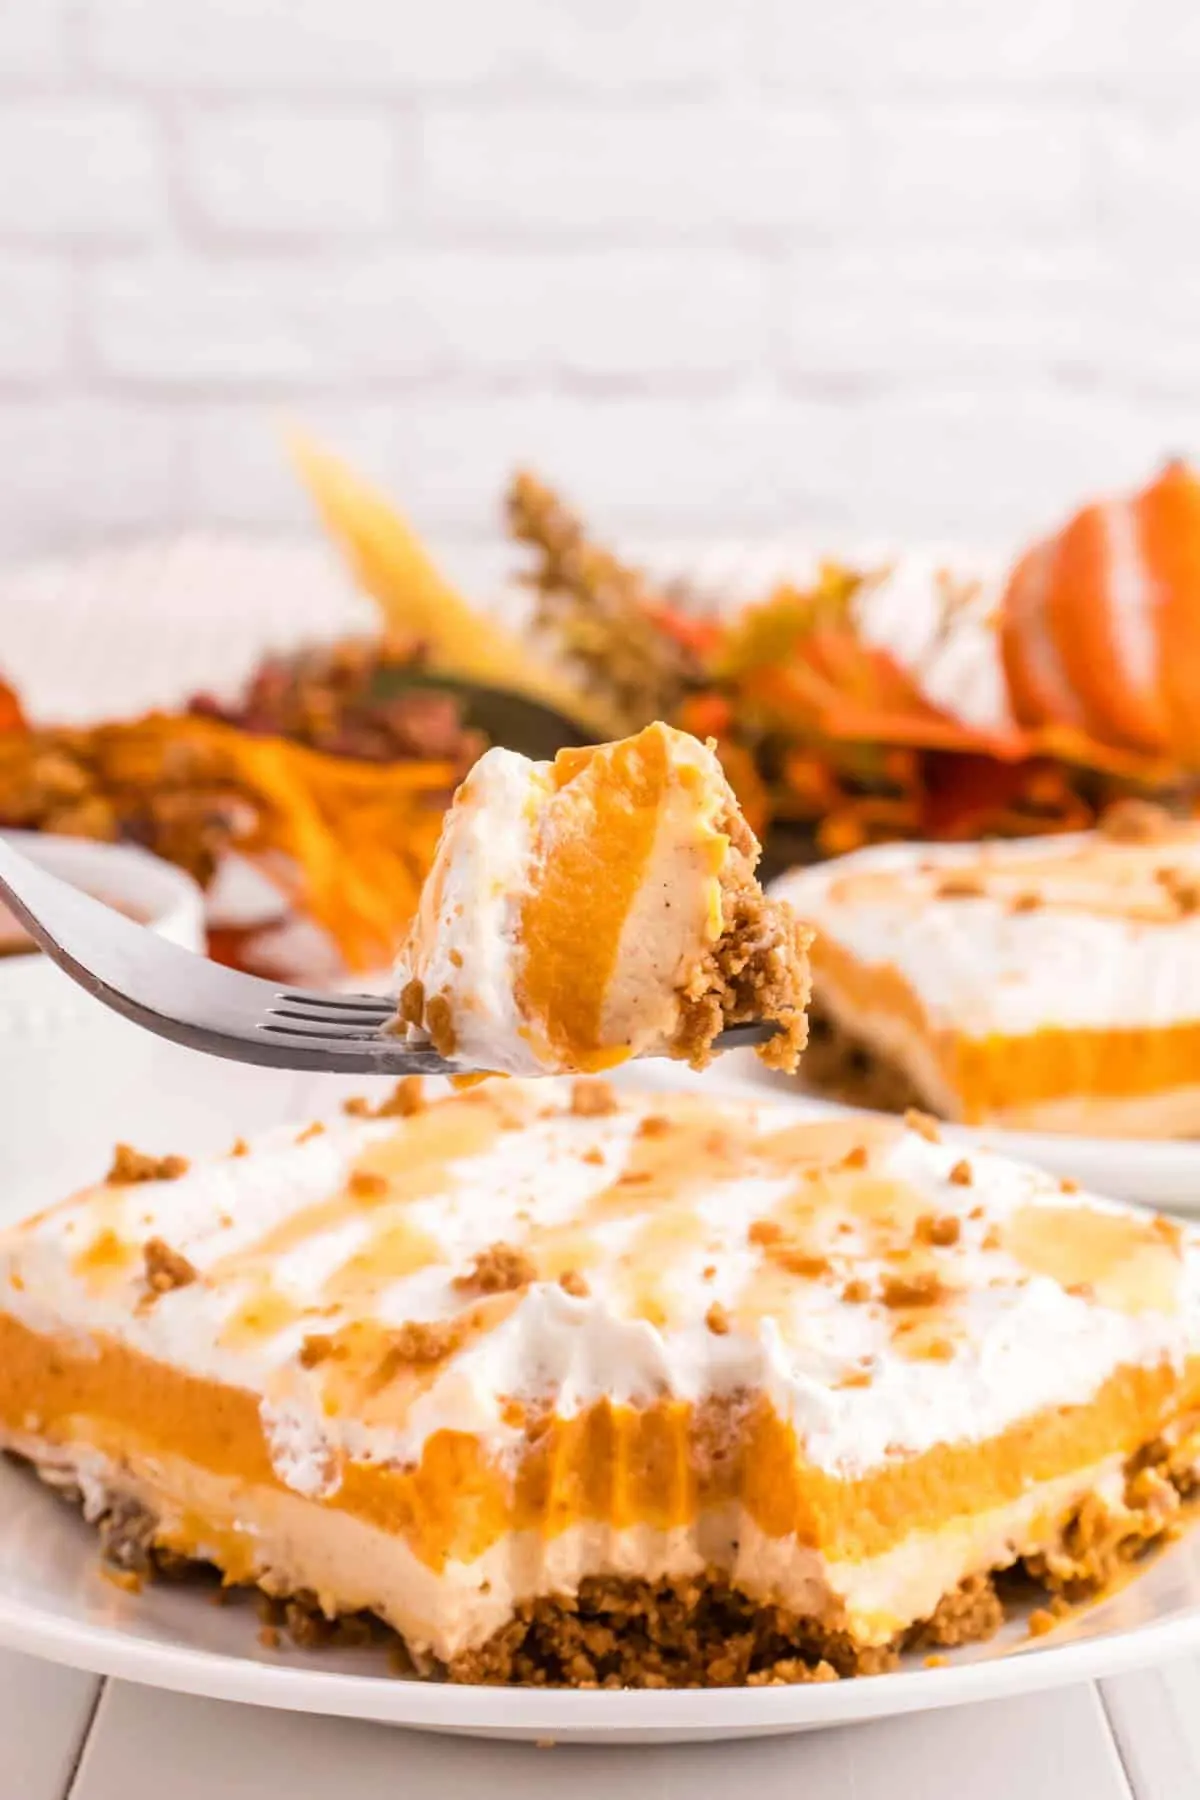 Pumpkin Delight is a rich and creamy dessert with layers of whipped topping, pumpkin pudding mousse mixture, cinnamon cheesecake and a gingersnap cookie crust.